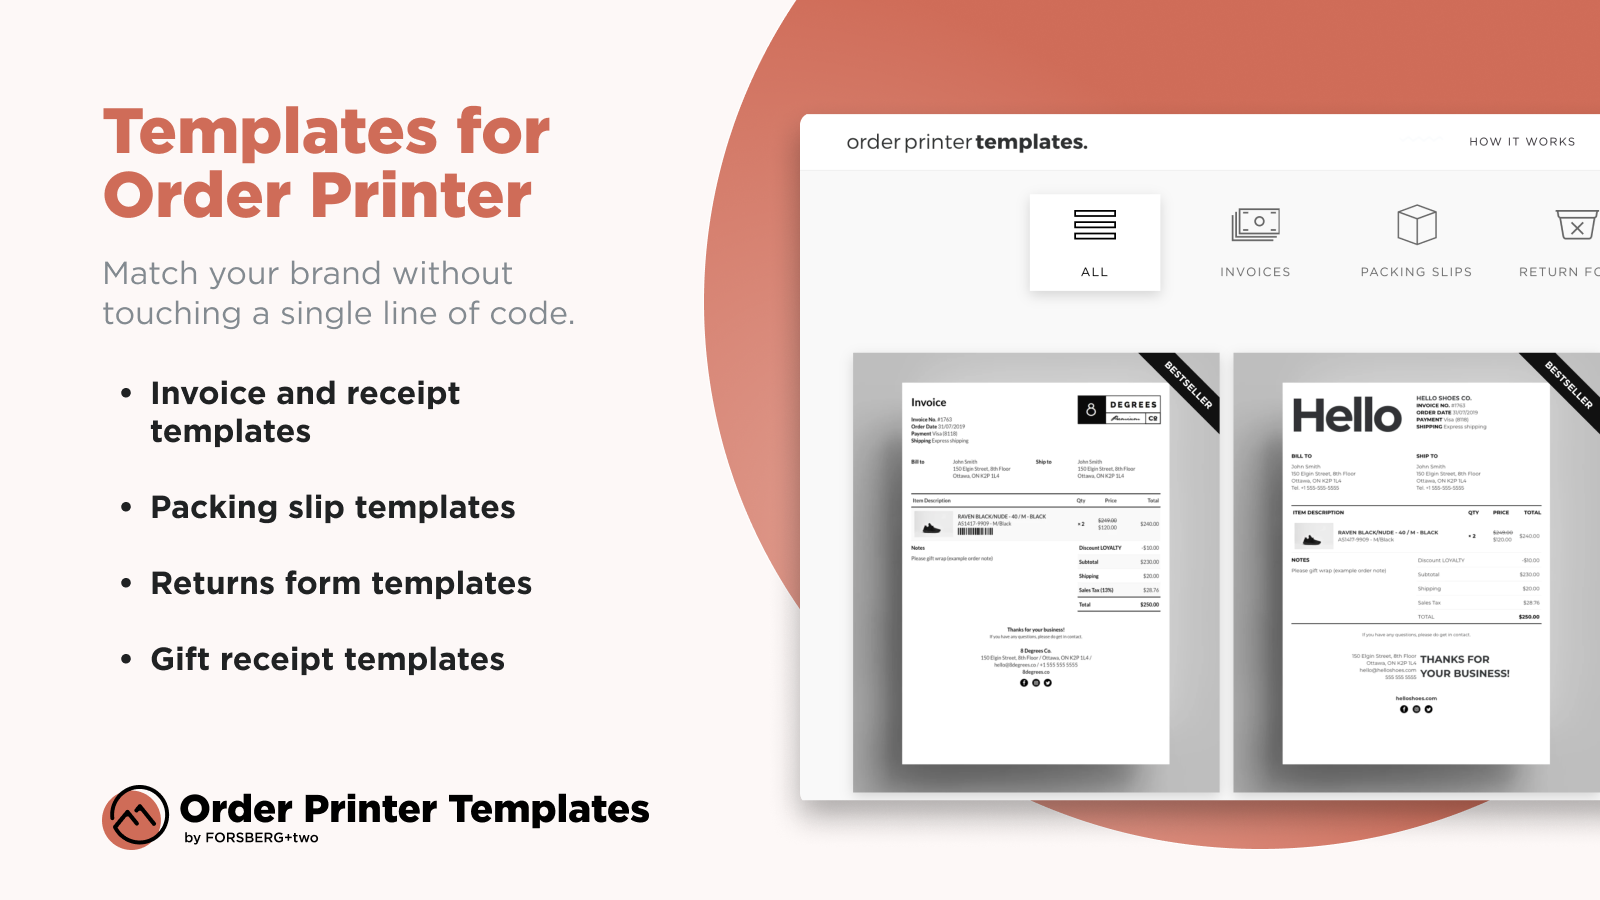 Invoices & other templates for Order Printer & Order Printer Pro